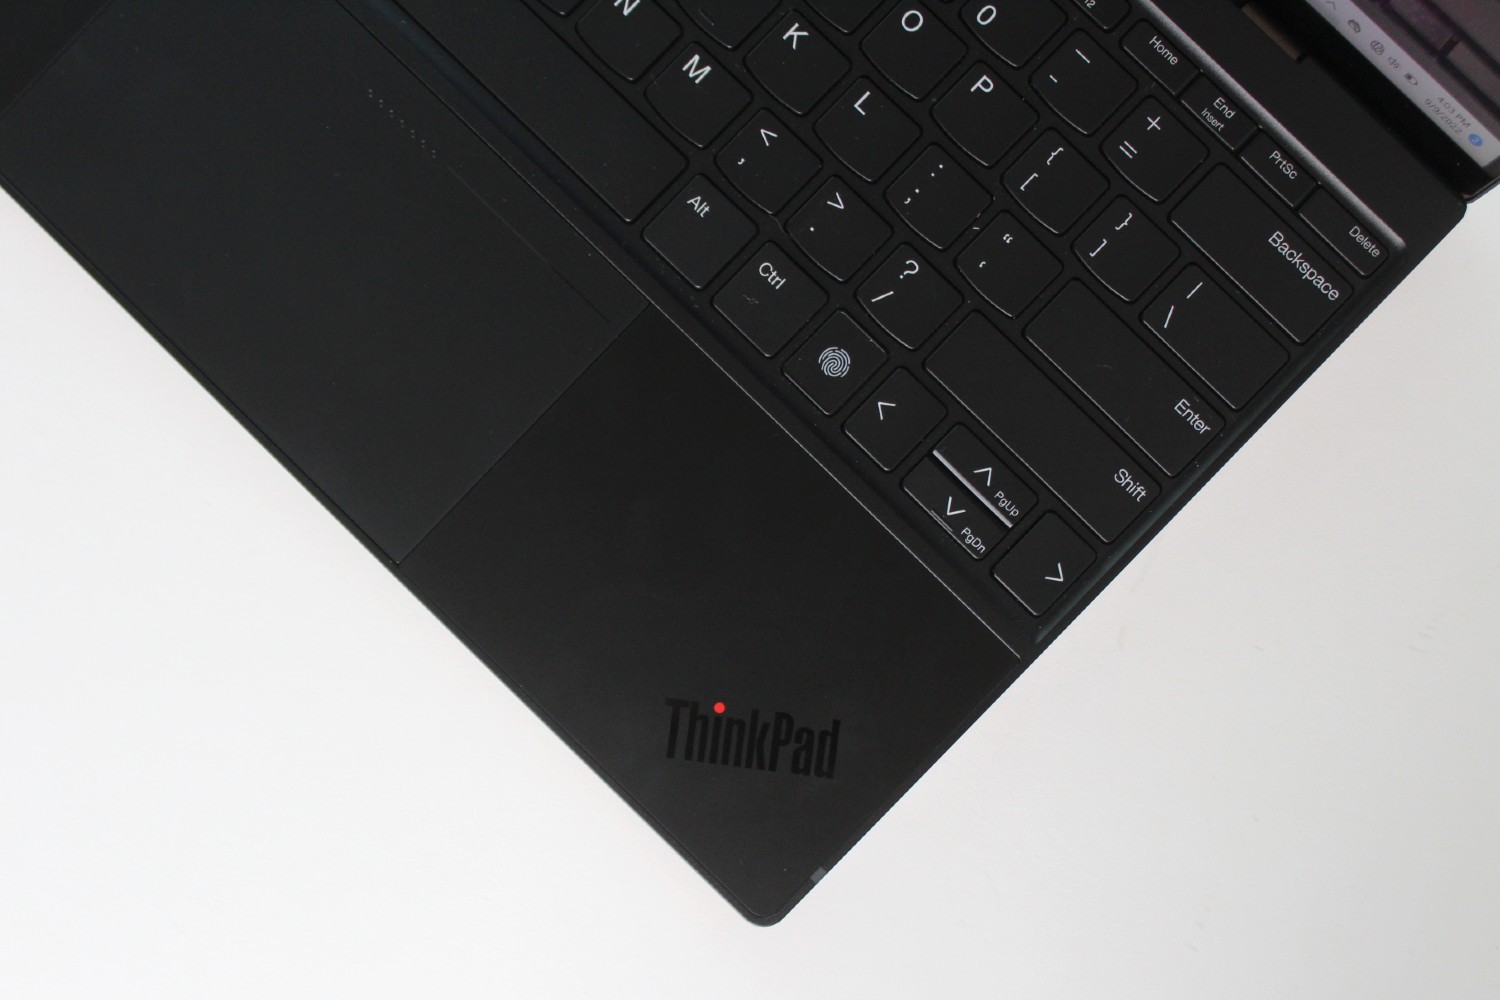 The keyboard of the ThinkPad Z13.